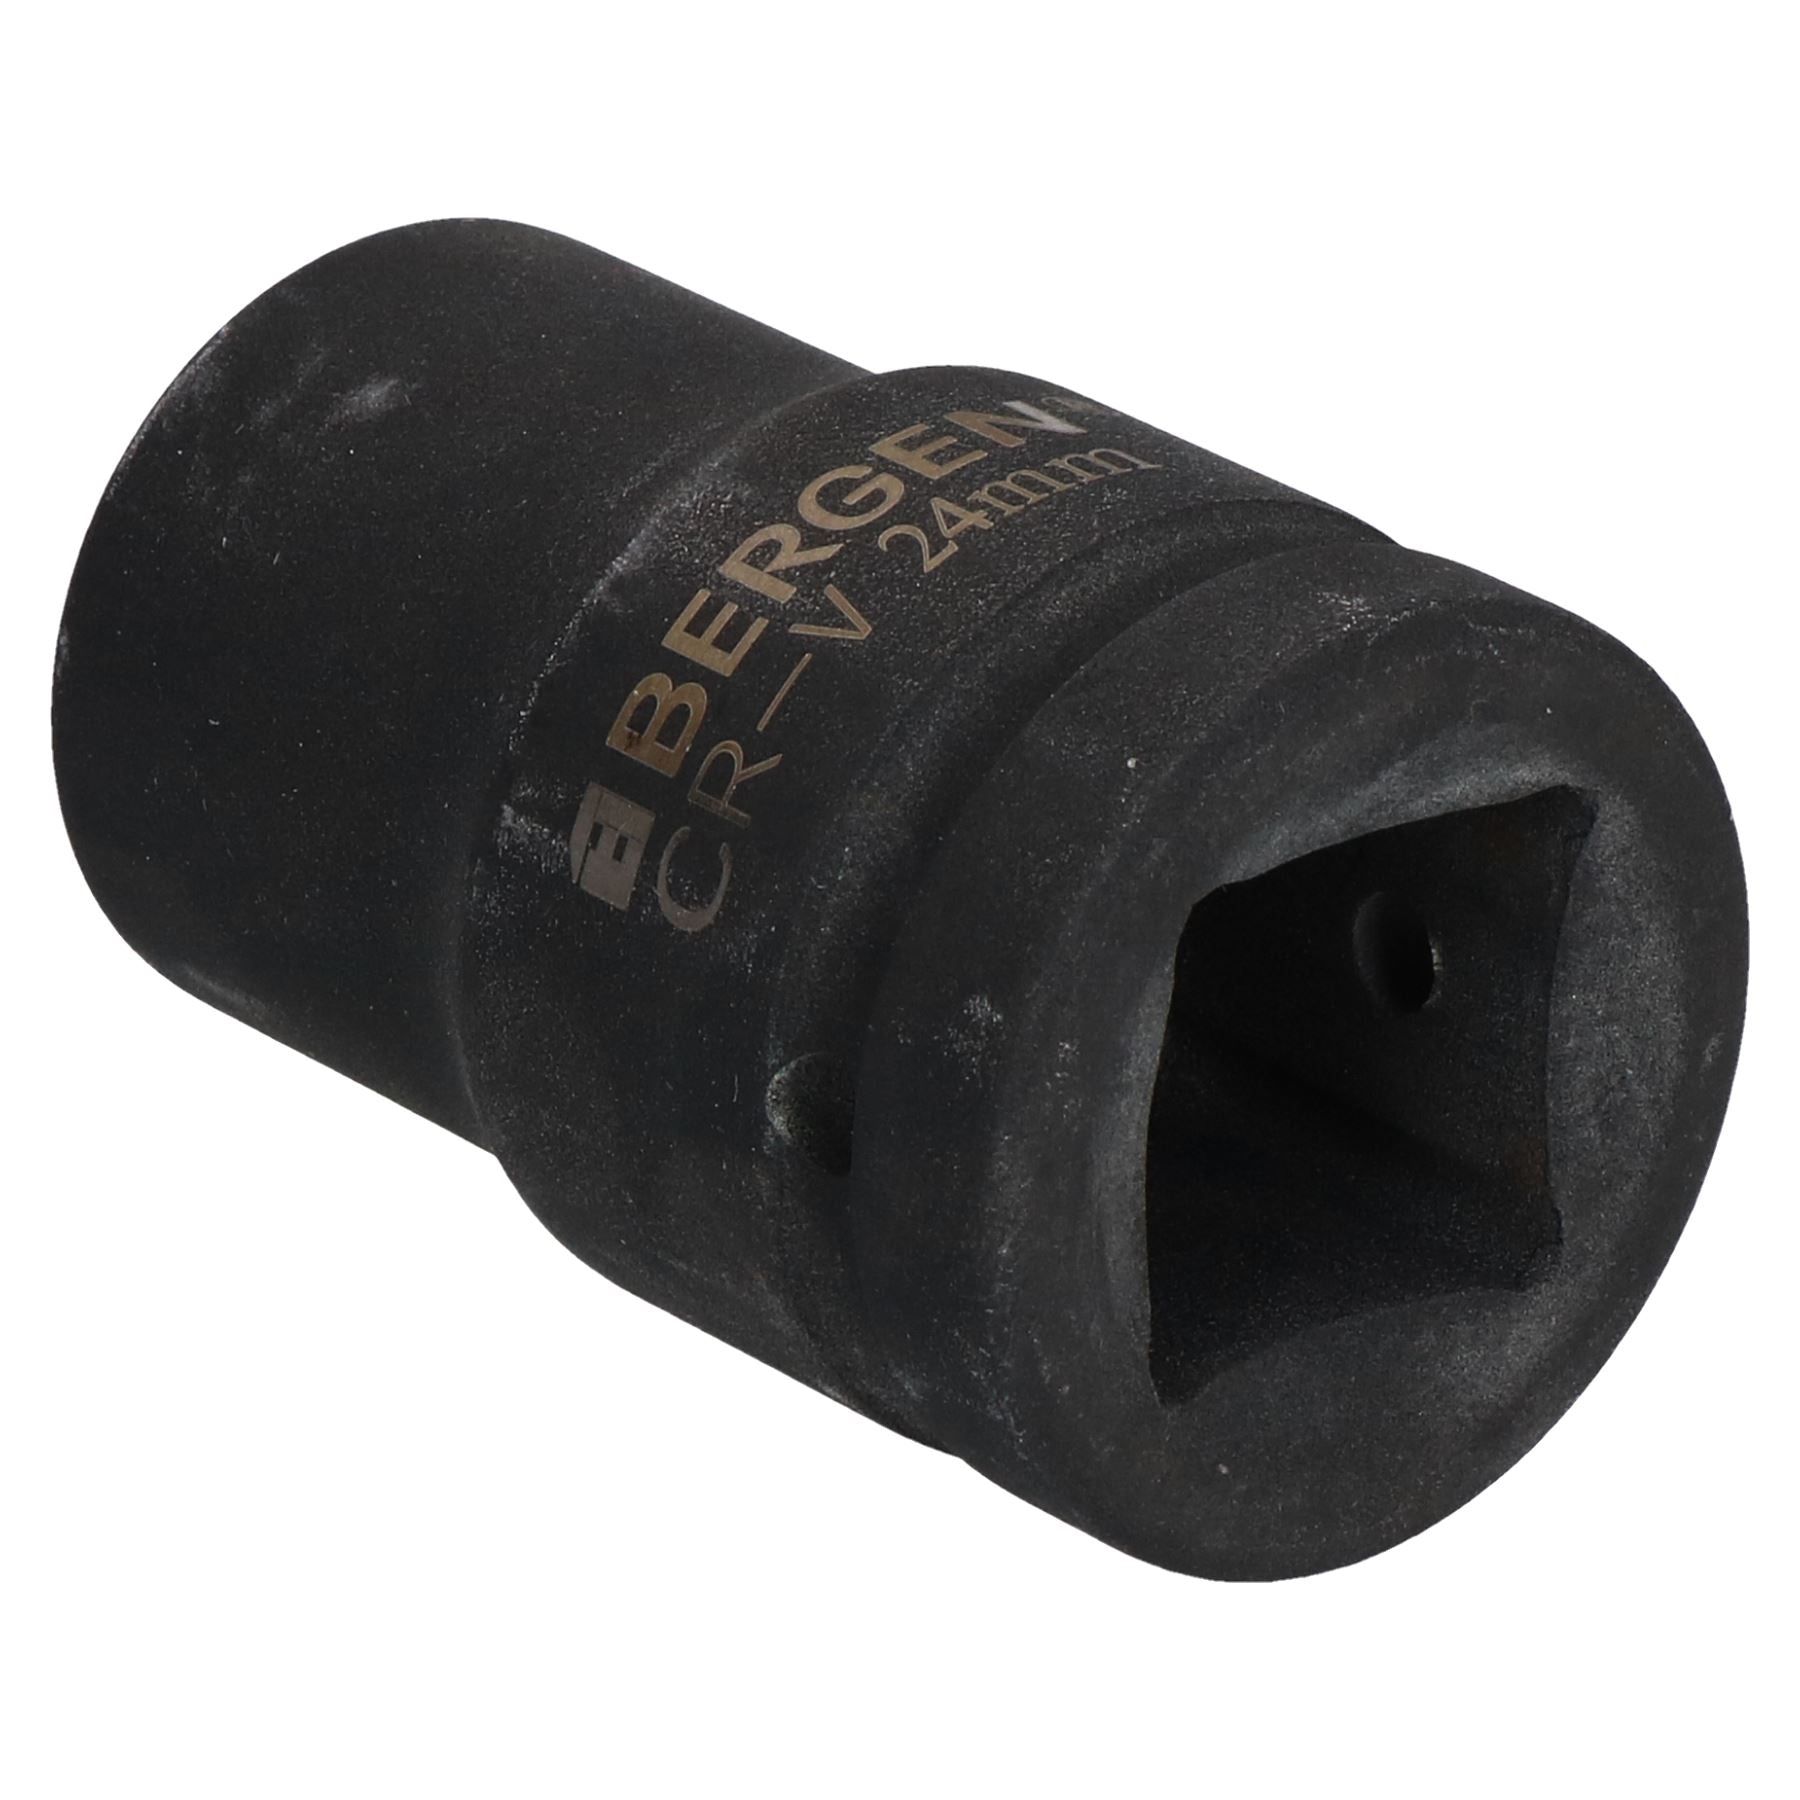 24mm Metric 3/4" or 1" Drive Deep Impact Socket 6 Sided With Step Up Adapter